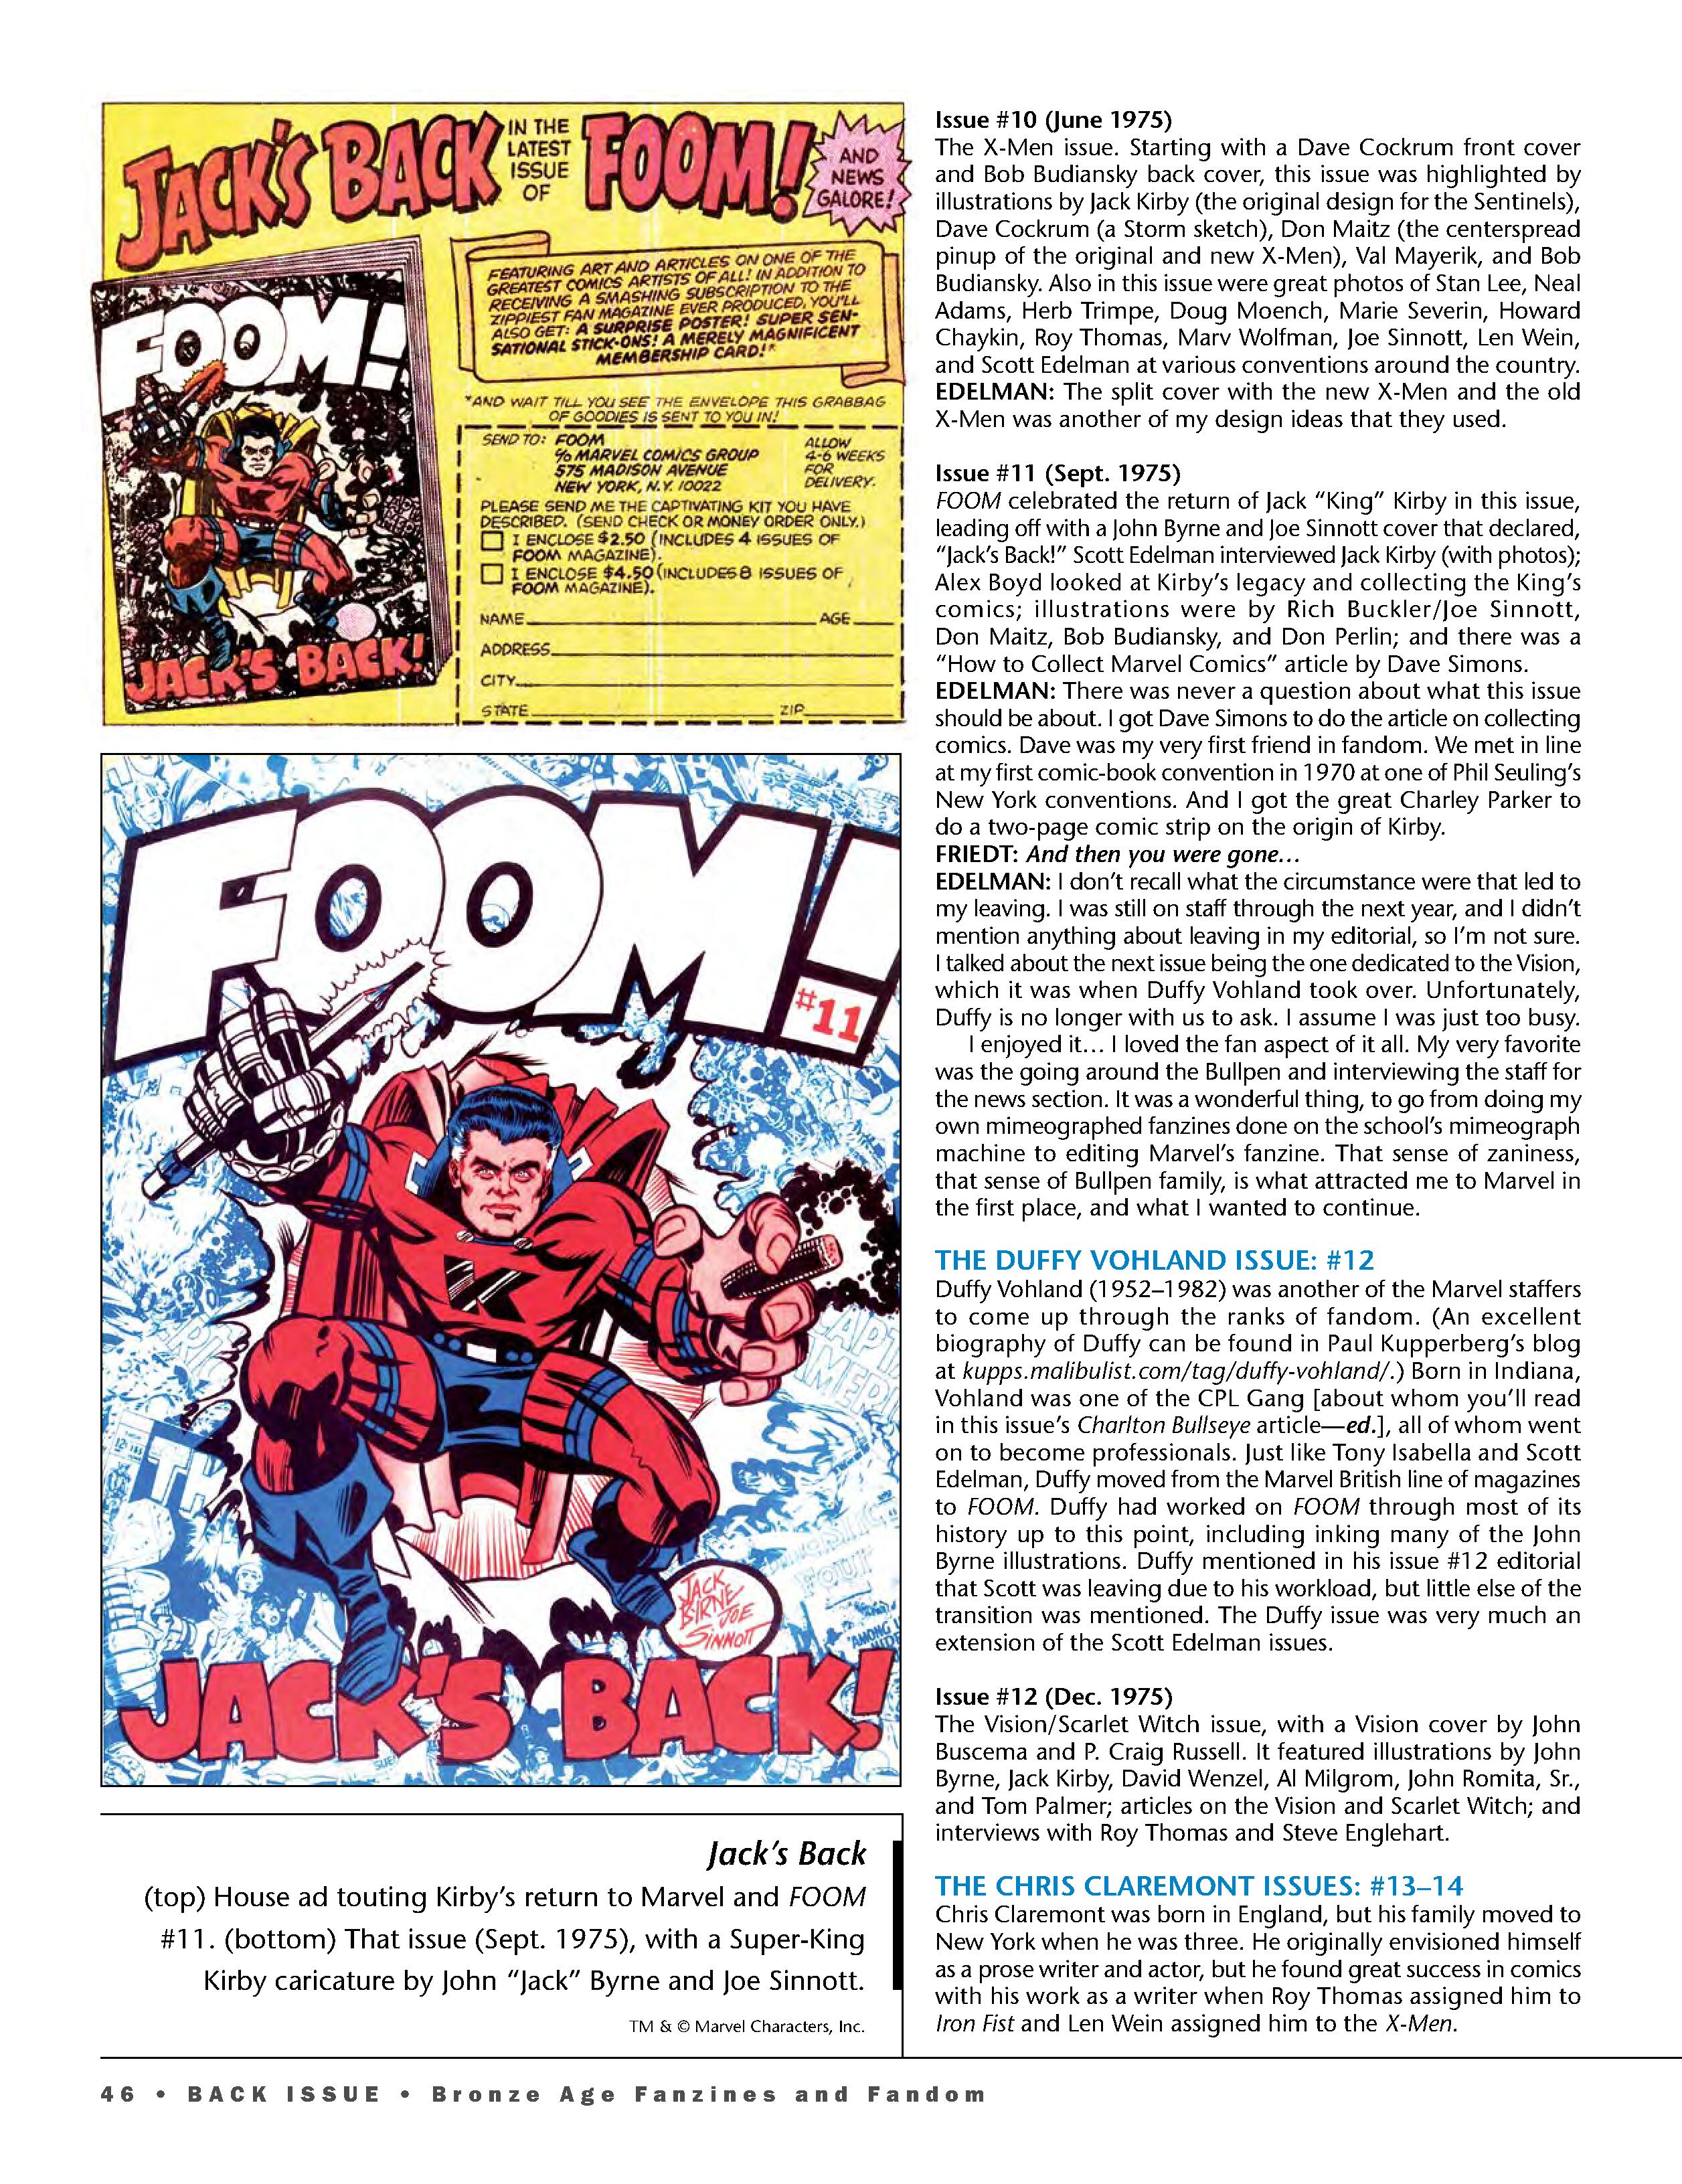 Read online Back Issue comic -  Issue #100 - 48